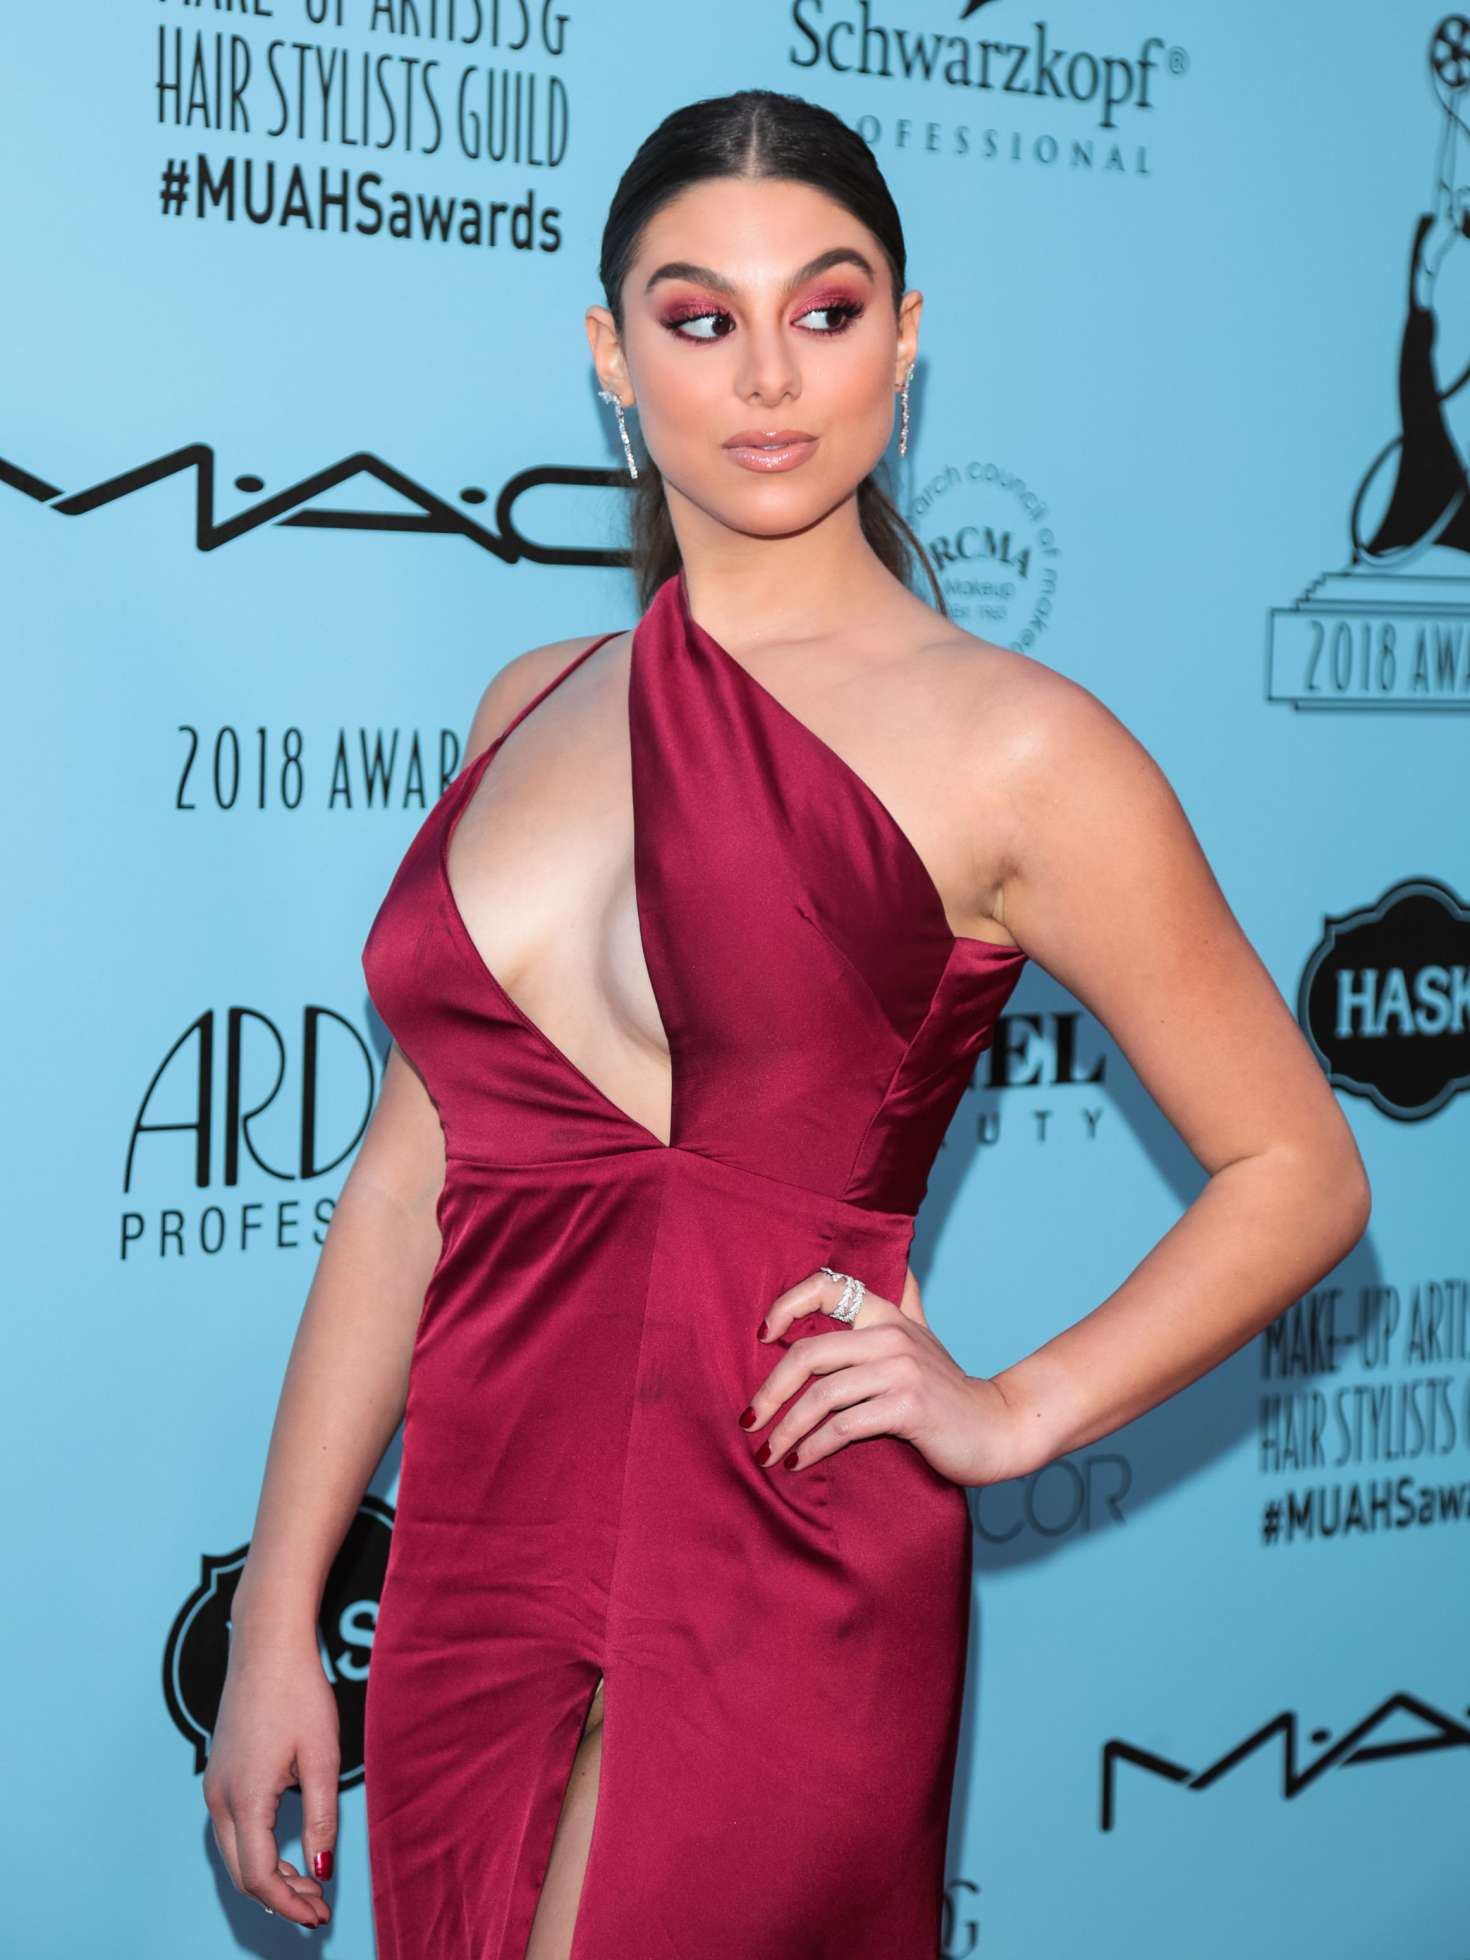 Kira Kosarin â€“ 2018 Make-Up Artists and Hair Stylists Guild Awards in LA |  Indian Girls Villa - Celebs Beauty, Fashion and Entertainment